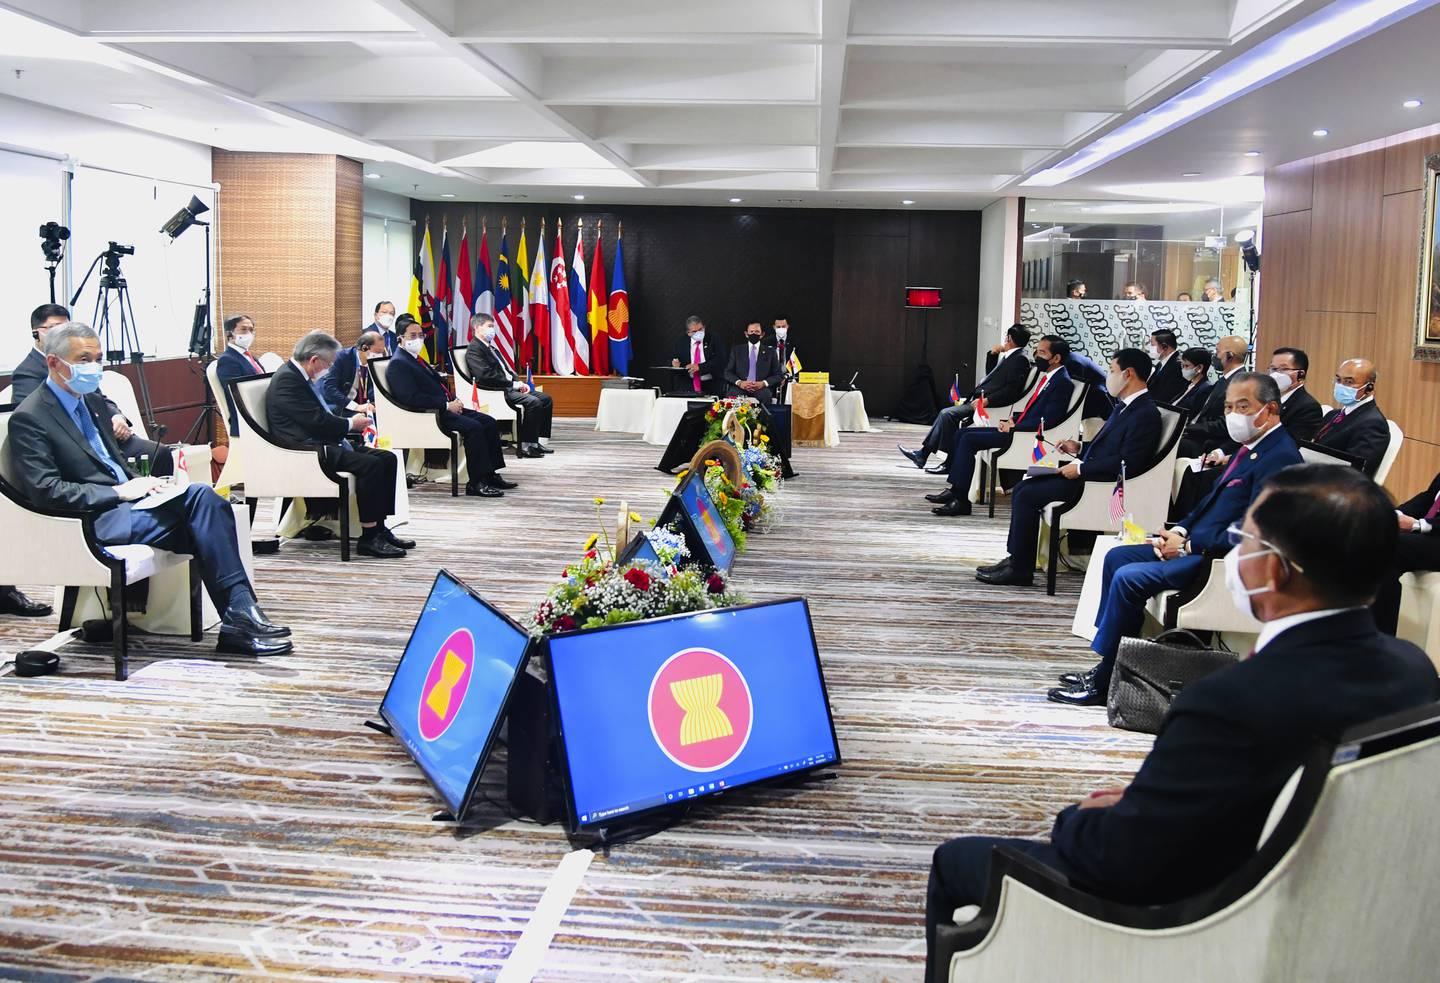 In this photo released by Indonesian Presidential Palace, Myanmar's Commander-in-Chief Senior General Min Aung Hlaing, bottom right, and ASEAN leaders convene during their meeting at the ASEAN Secretariat in Jakarta, Indonesia, Saturday, April 24, 2021. Southeast Asian leaders met Myanmar's top general and coup leader in an emergency summit in Indonesia Saturday, and are expected to press calls for an end to violence by security forces that has left hundreds of protesters dead as well as the release of Aung San Suu Kyi and other political detainees. (Laily Rachev, Indonesian Presidential Palace via AP)